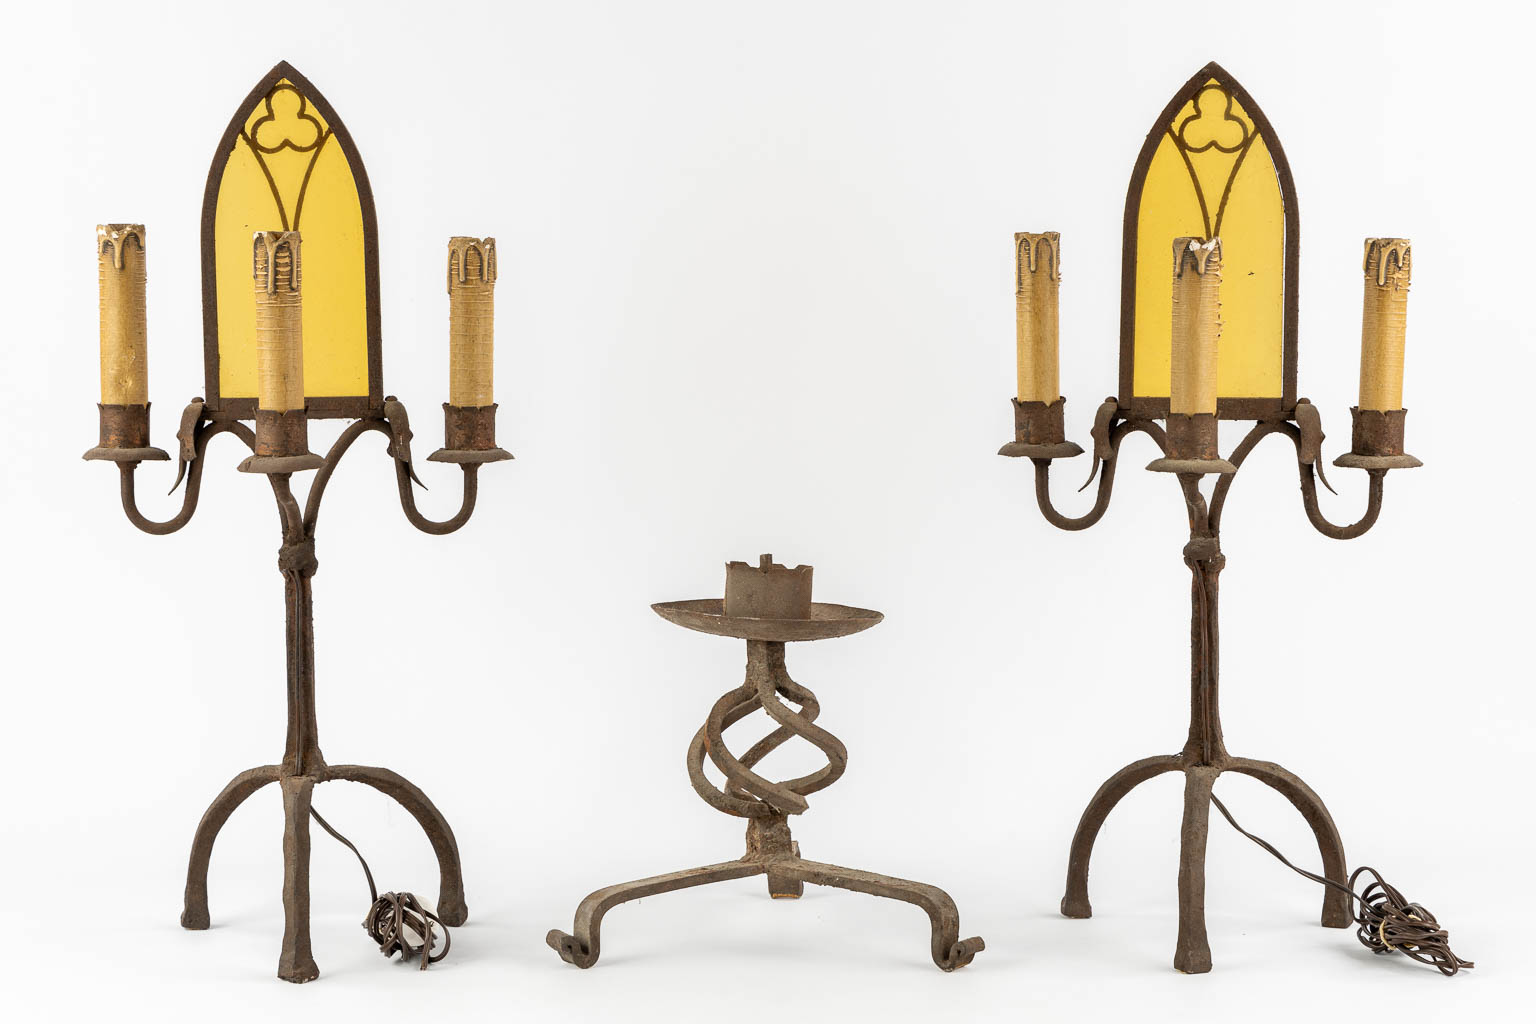 A pair of wrought iron table lamps in a Gothic Revival style. Added a candlestick. (H:63 cm)